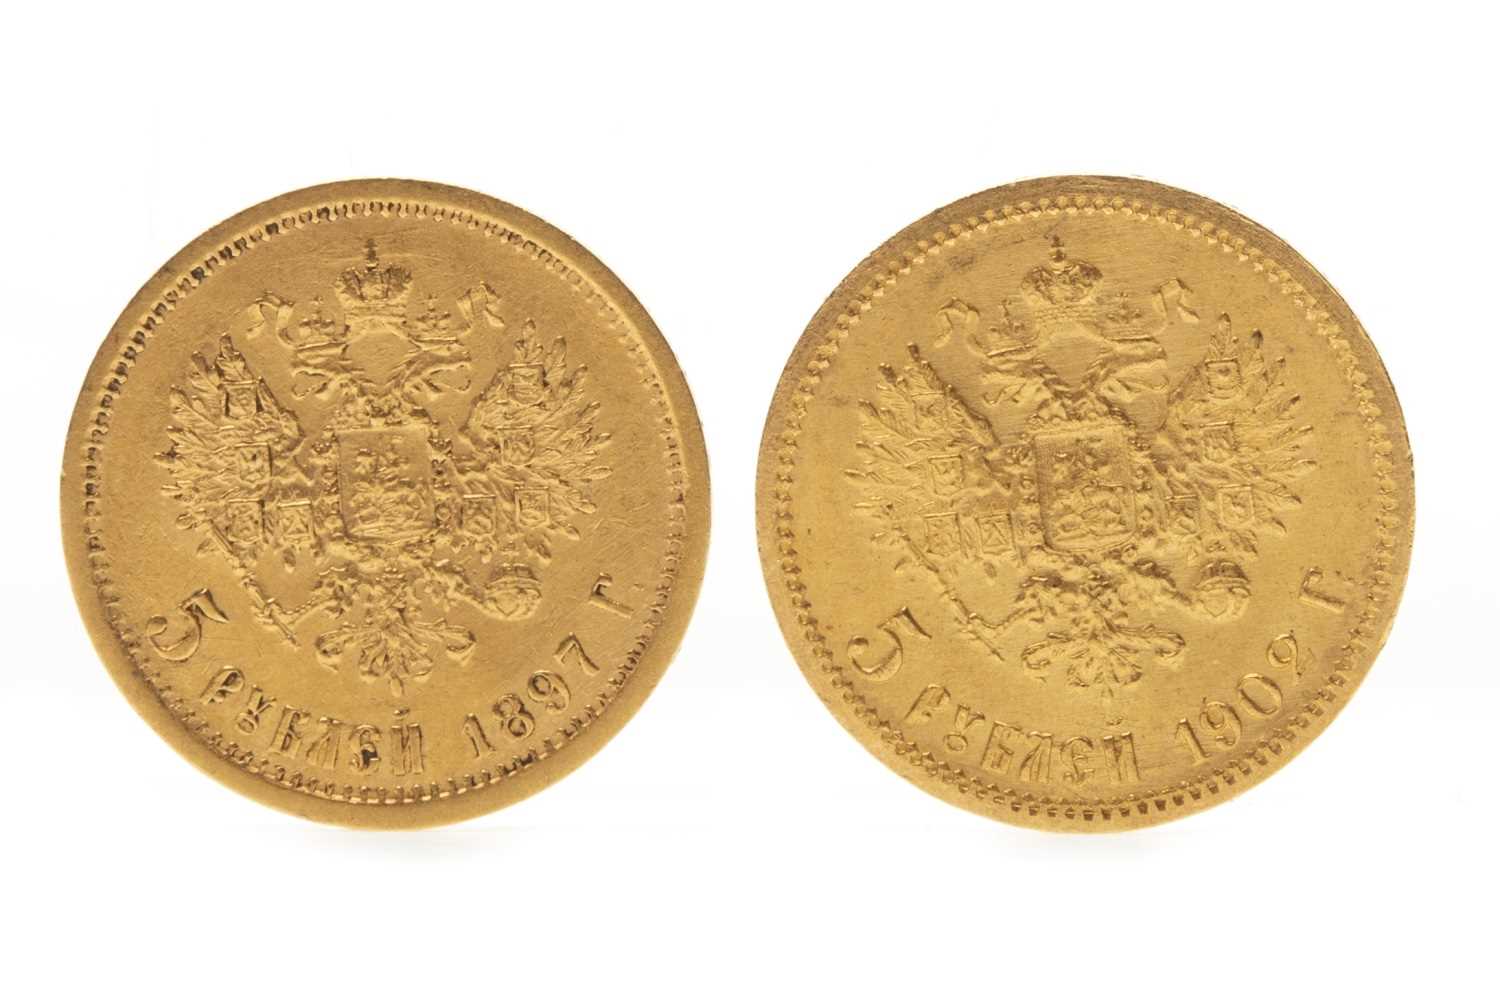 Lot 583 - TWO GOLD 5 RUBLE COINS, 1897 AND 1902